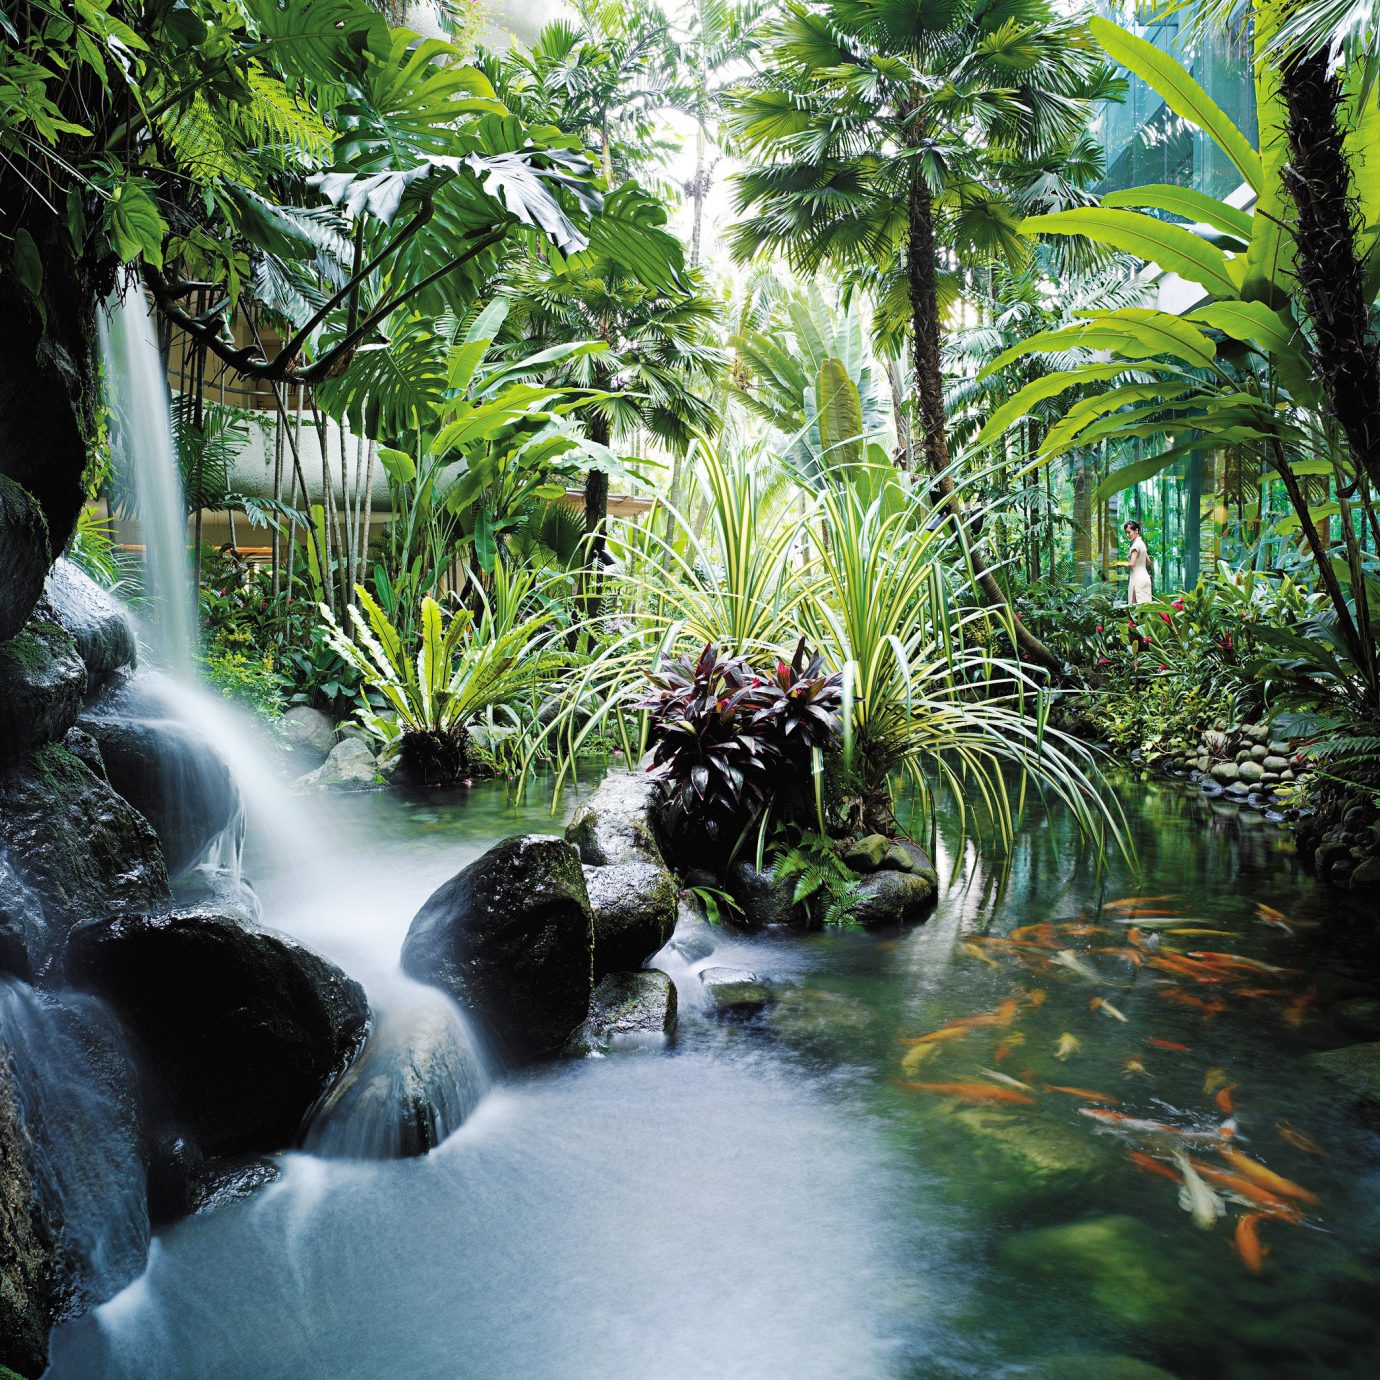 Jungle River Waterfall tree Nature habitat water vegetation natural environment rainforest Forest botany tropics water feature stream arecales flower Garden surrounded